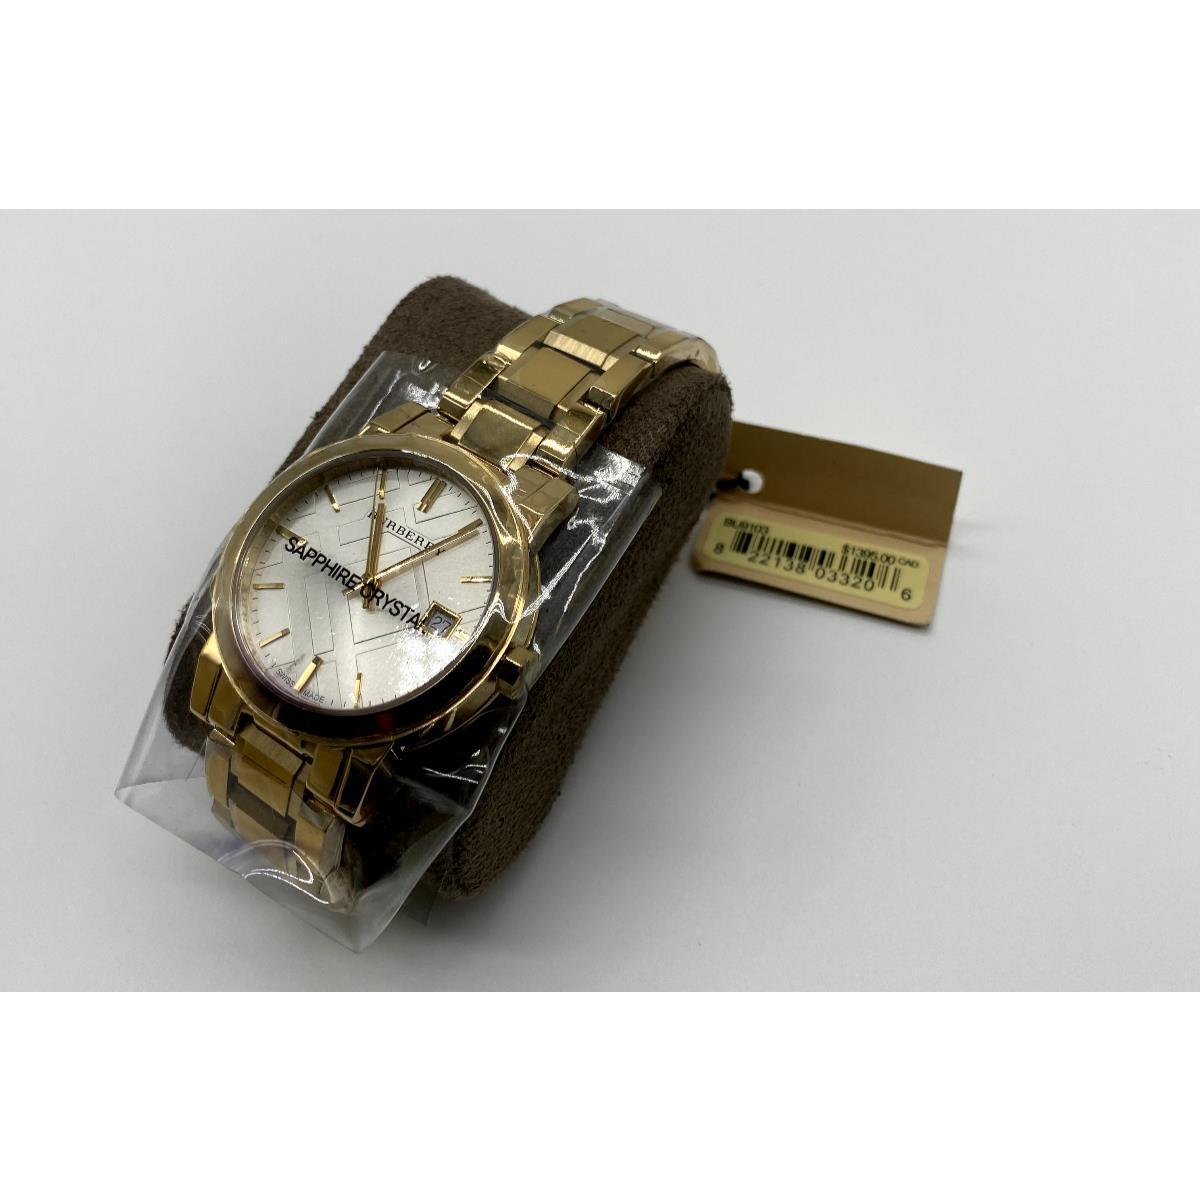 Burberry watch Ladies - Gold Dial, Gold Band 3